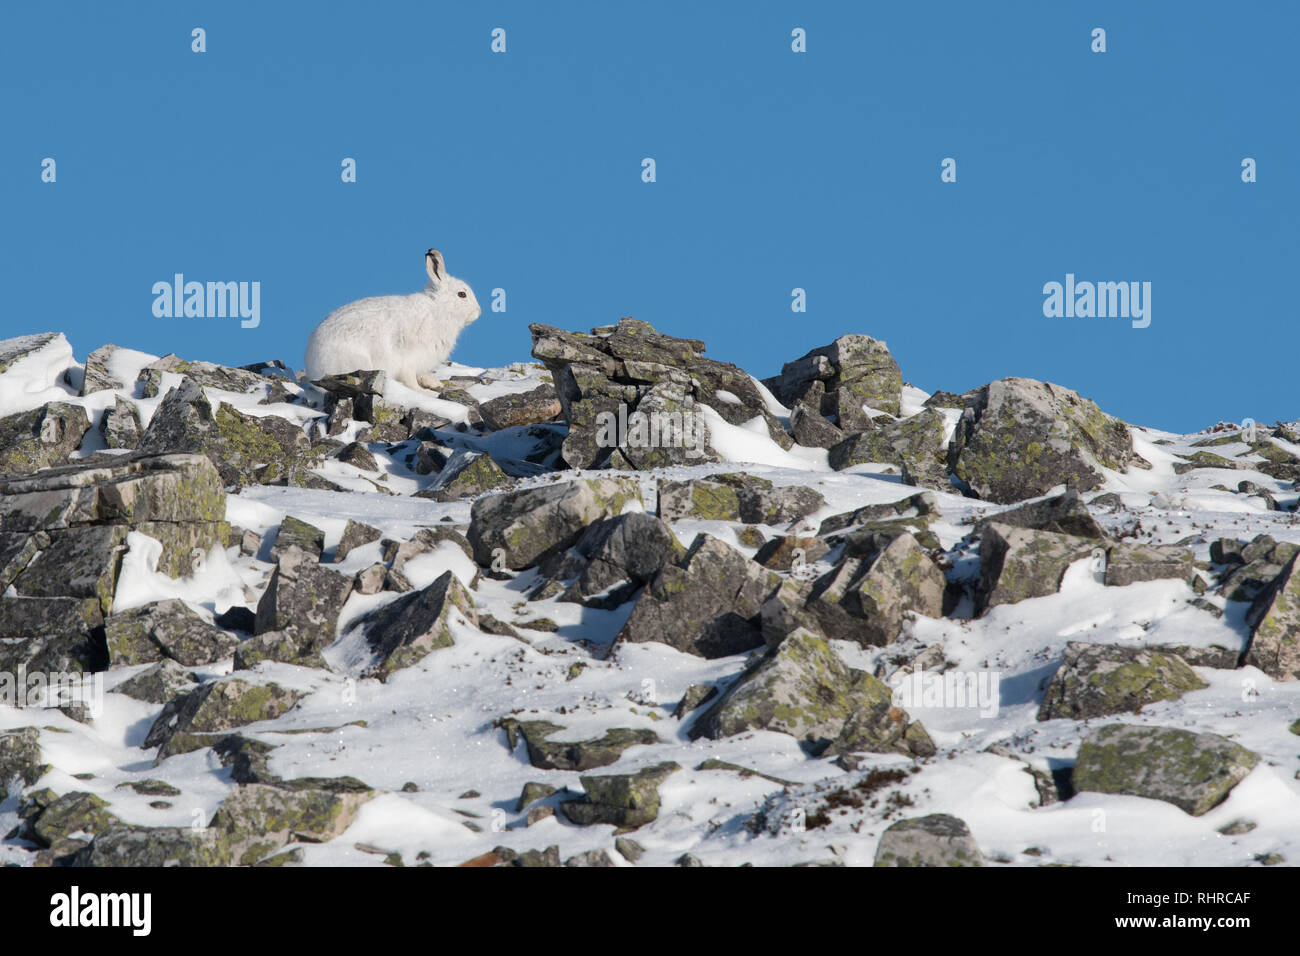 Mountain Hare - Lepus timidus - sitting among rocks on top of hill in side profile against blue sky - in the Cairngorms National Park, Scotland, UK Stock Photo